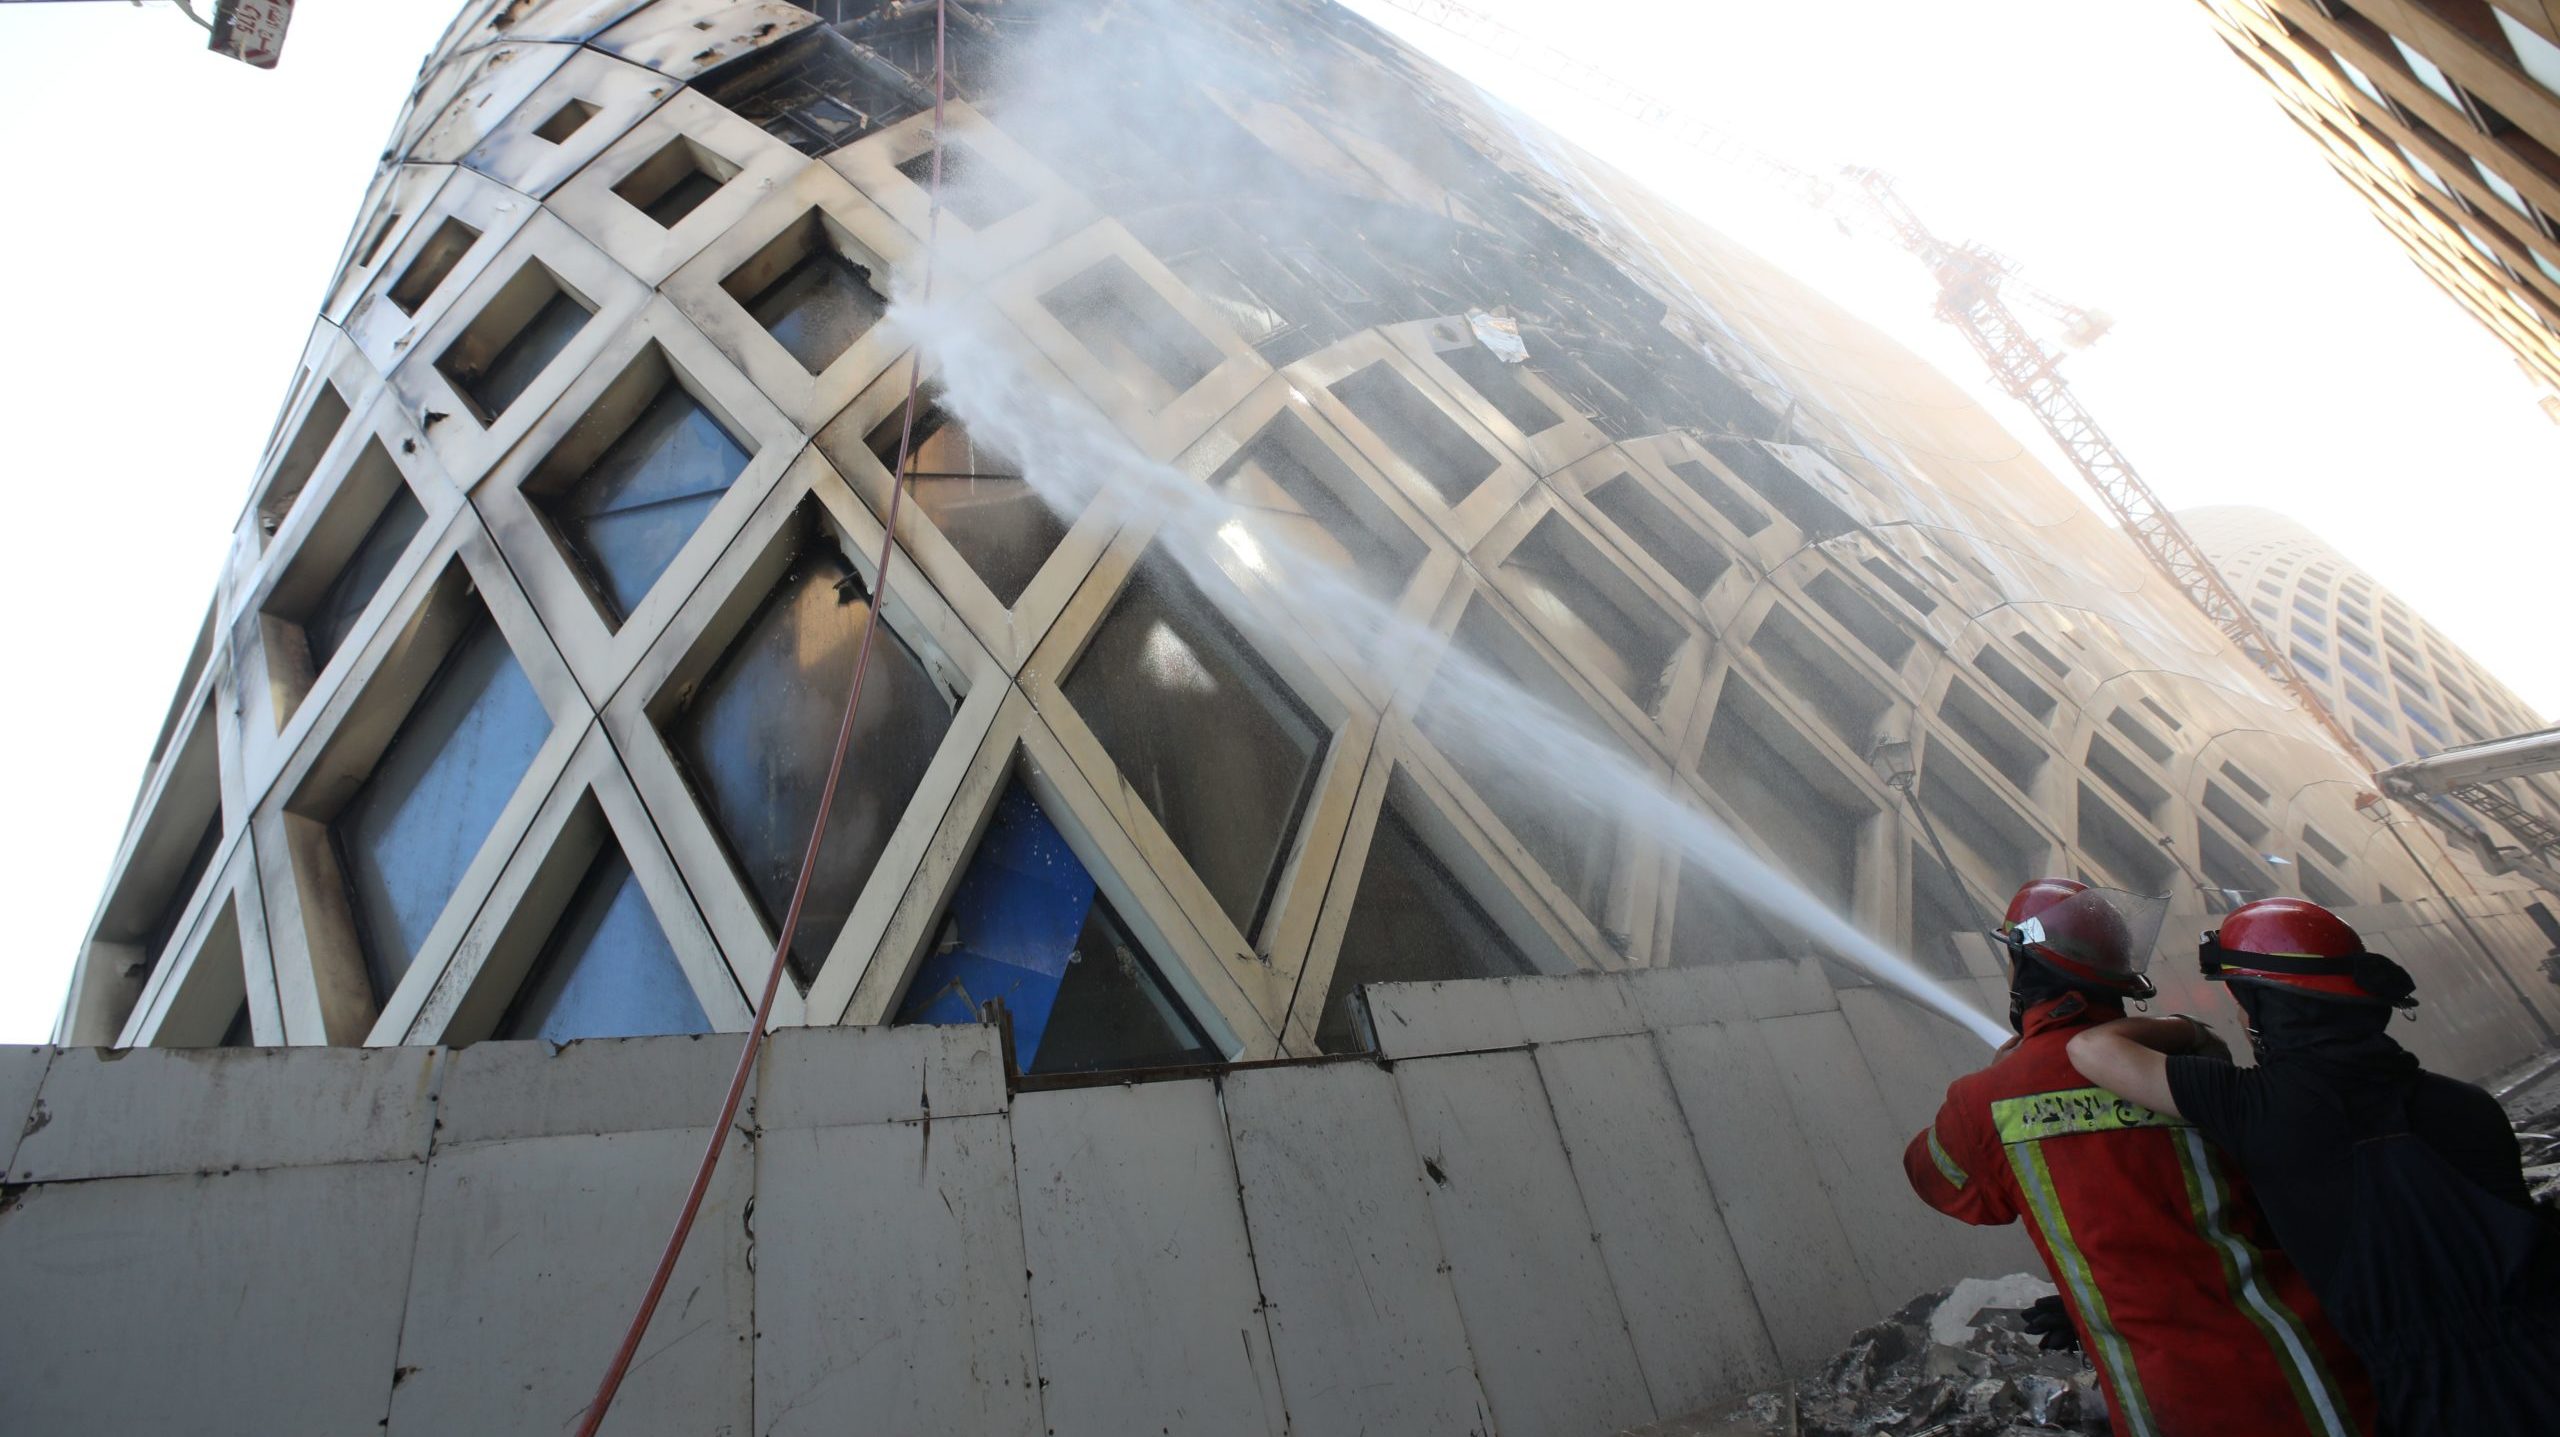 Beirut Suffers 3rd Large Fire in Week